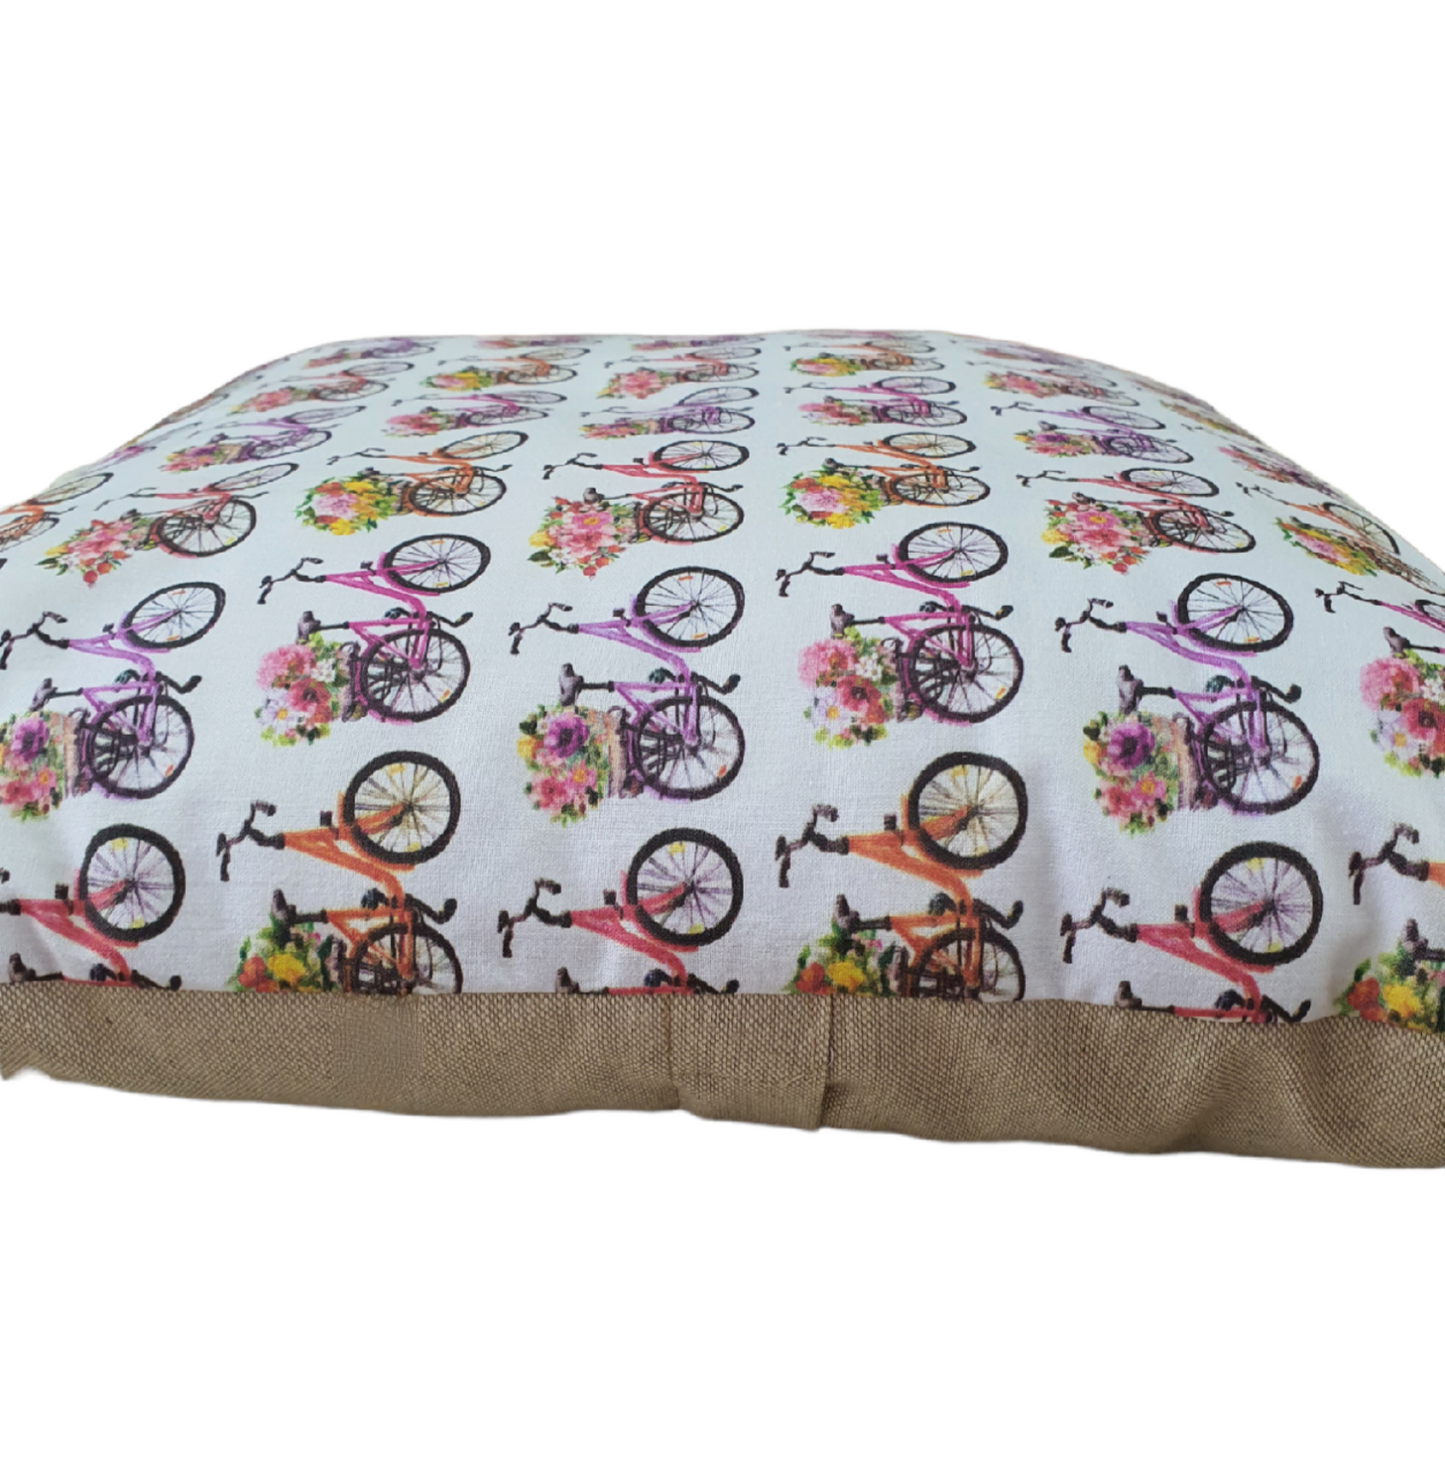 Floral Bike Fabric - Handmade Cushion Cover, Flower Bicycles (18" x 18")